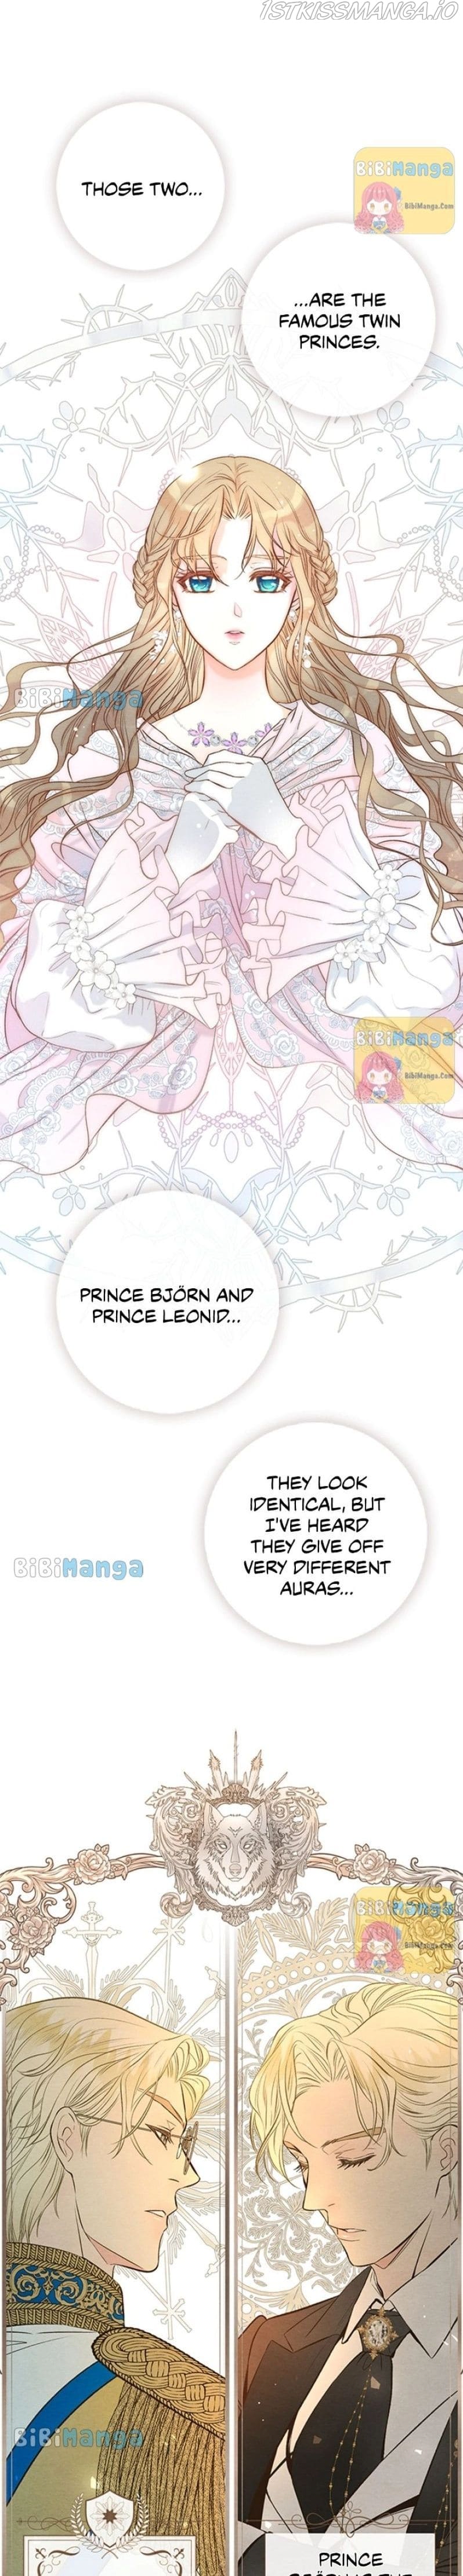 The Problematic Prince chapter 8